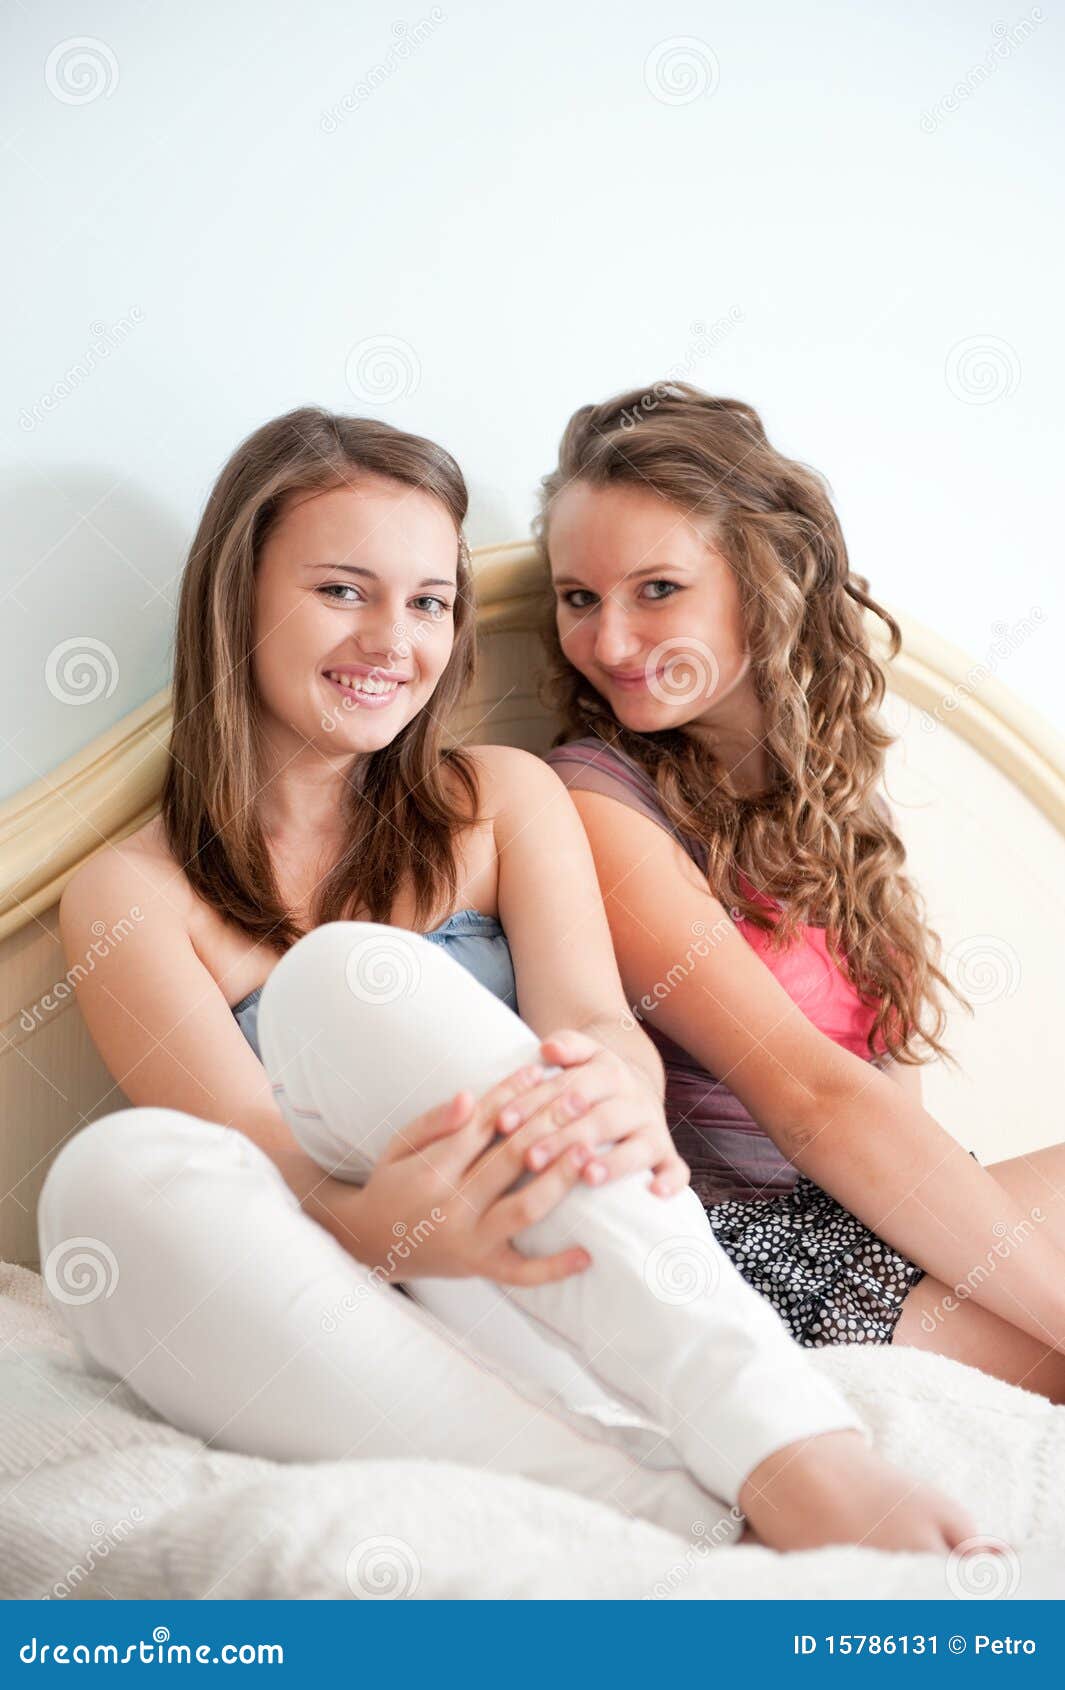 Two girls in bed stock image. Image of sitting, smiling - 15786131